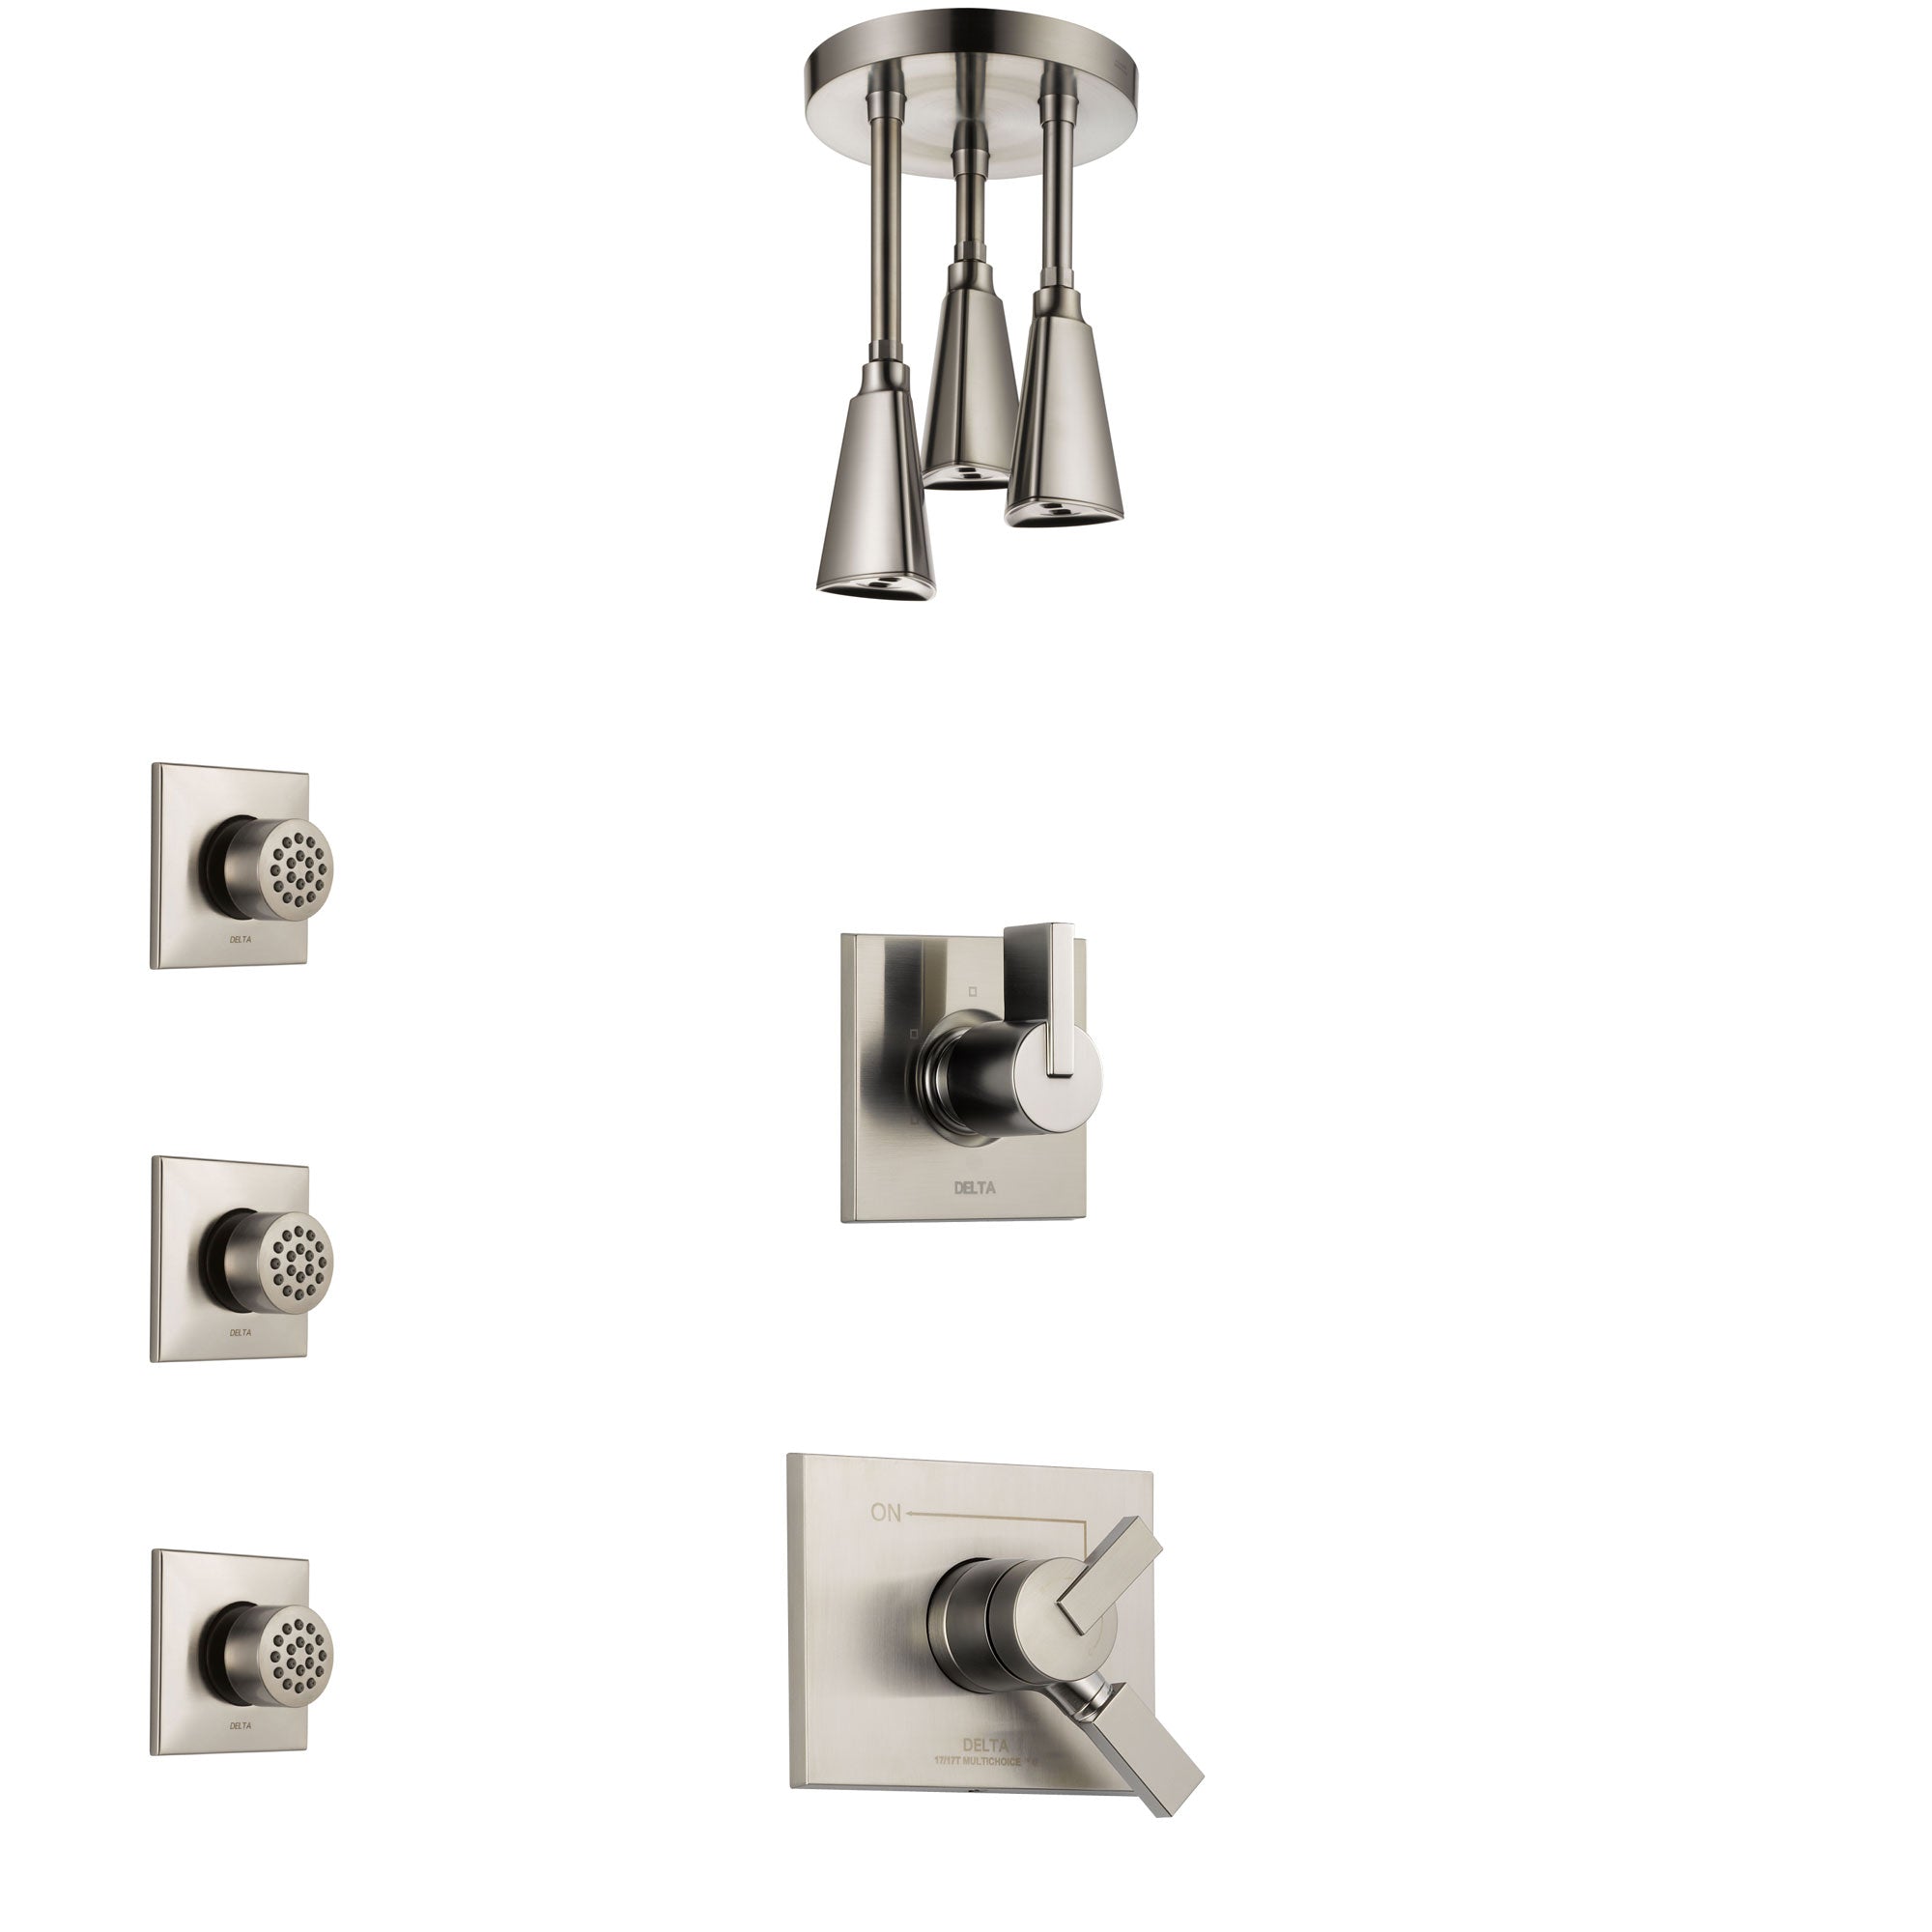 Delta Vero Stainless Steel Finish Shower System with Dual Control Handle, 3-Setting Diverter, Ceiling Mount Showerhead, and 3 Body Sprays SS1753SS6